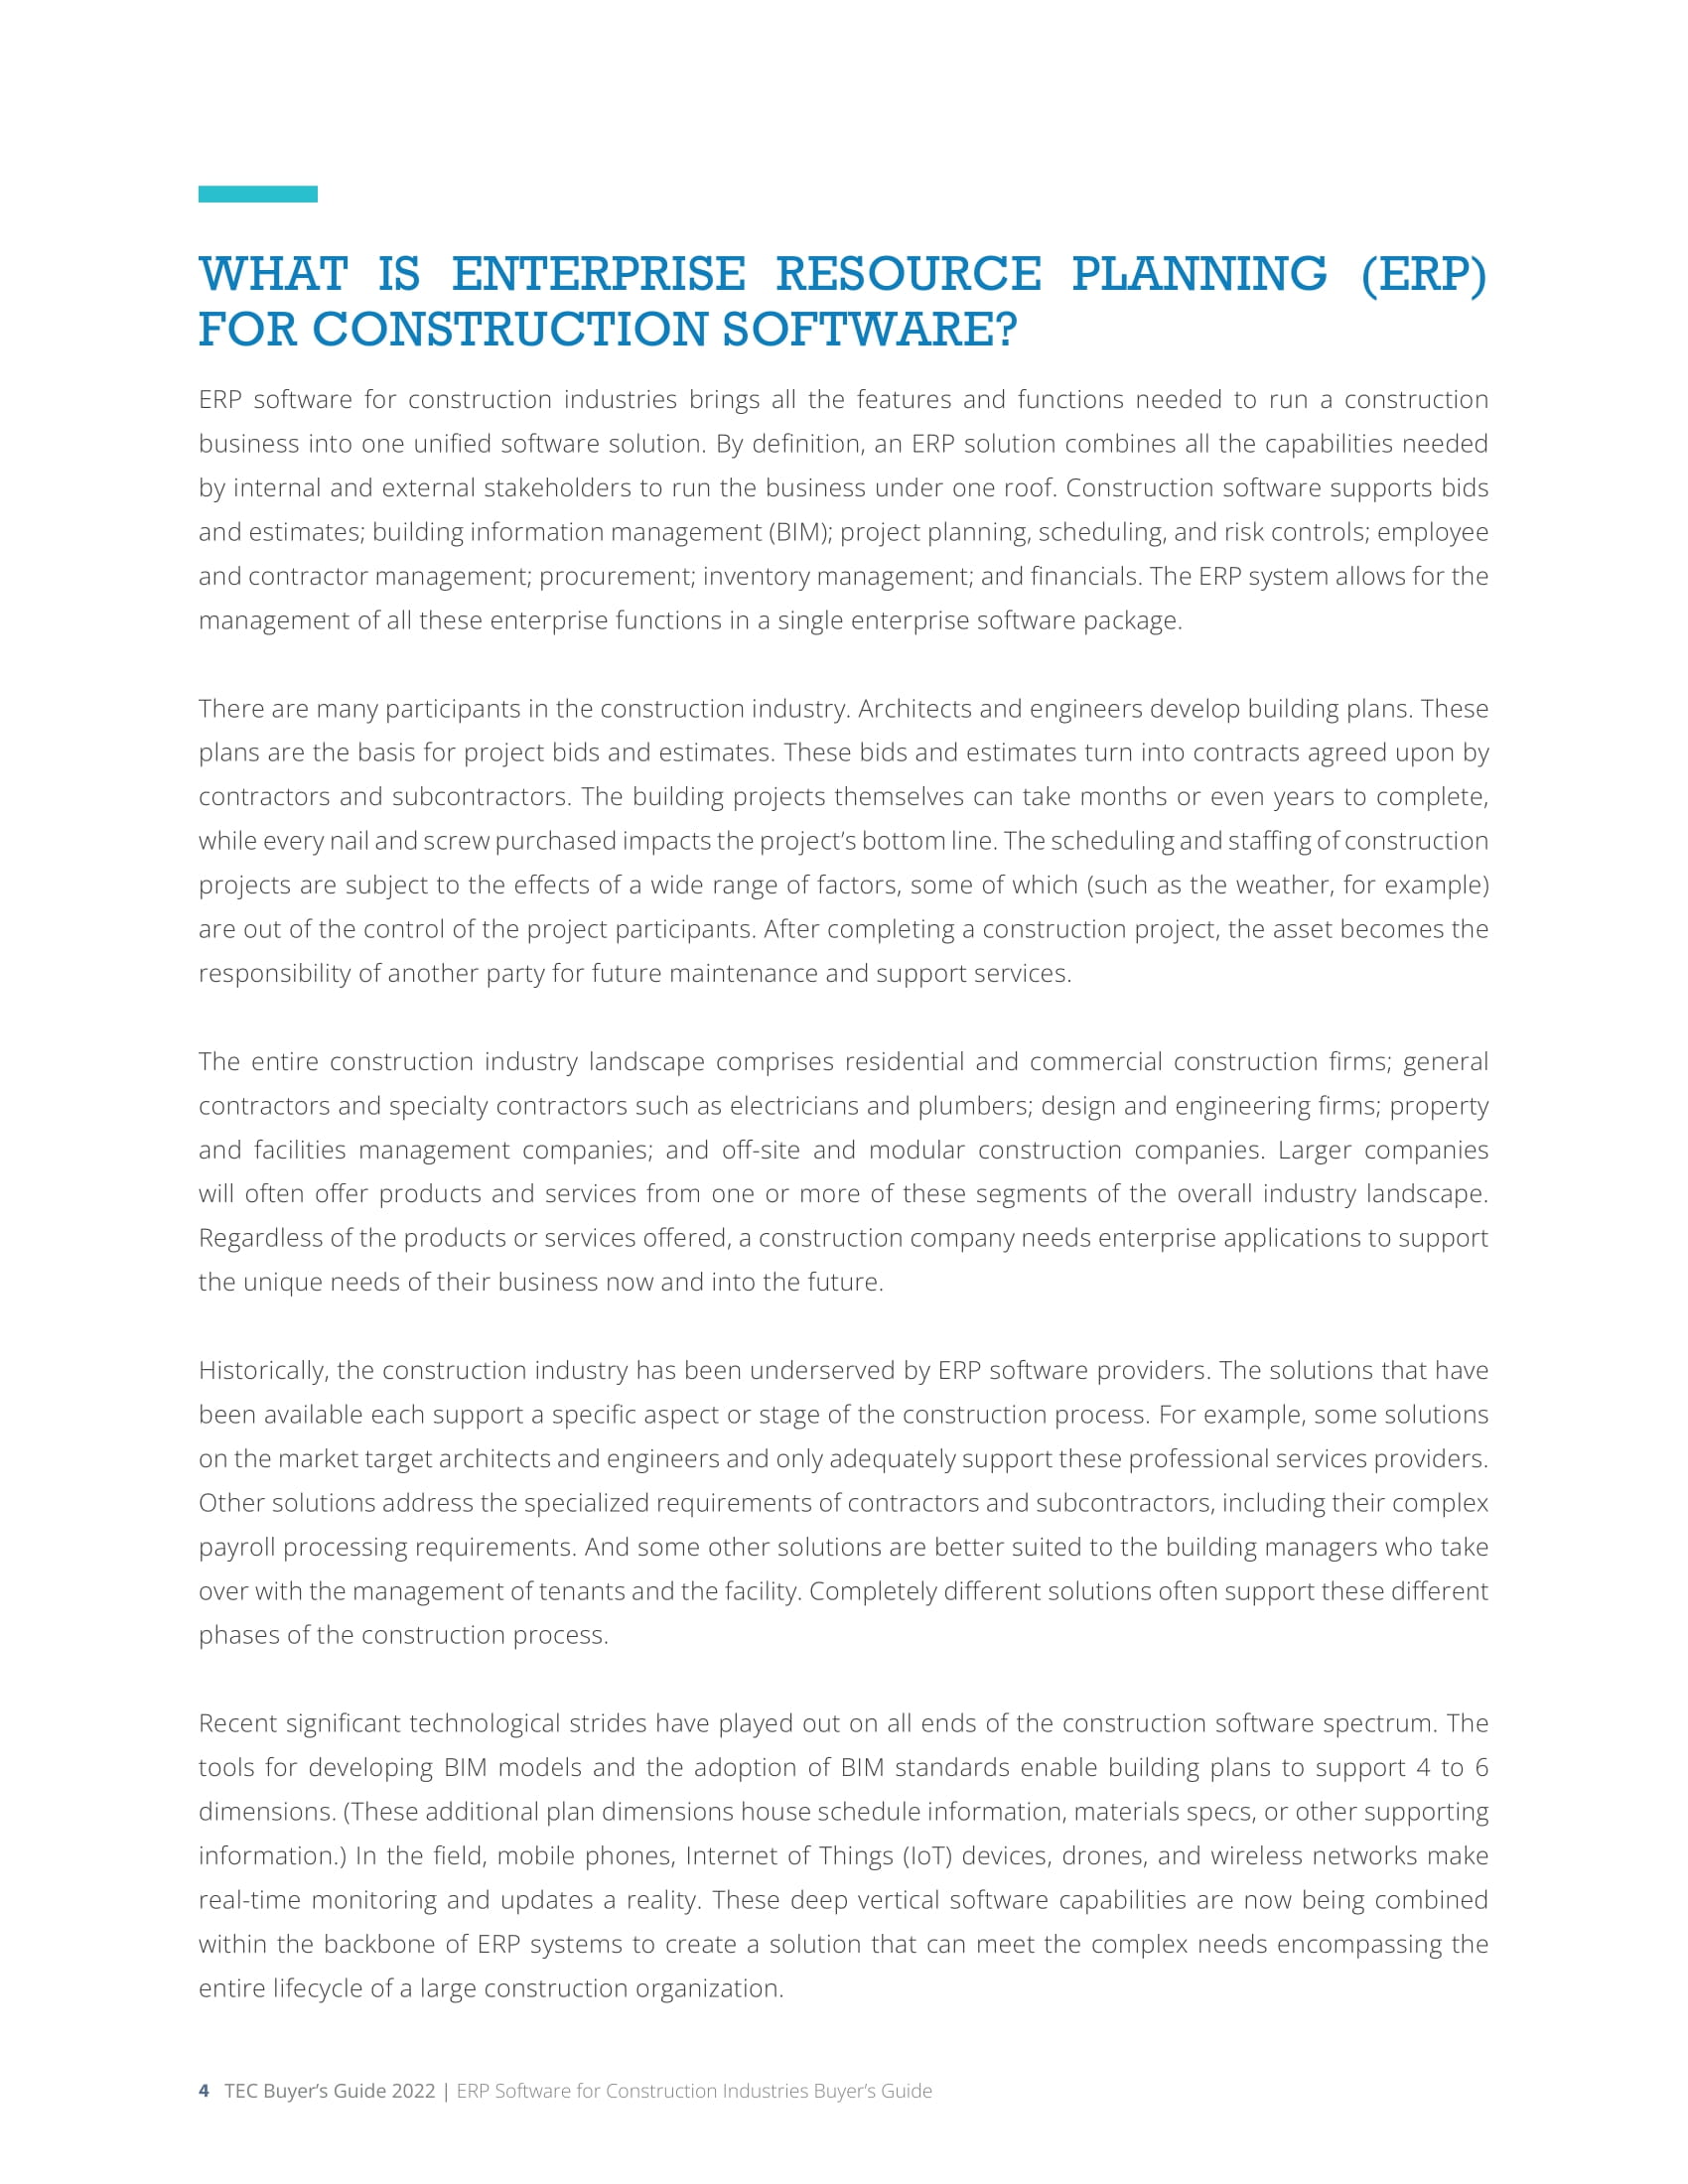 The ERP Software for Construction Industries Buyer’s Guide by Technology Evaluation Centers (TEC) features Acumatica., page 3